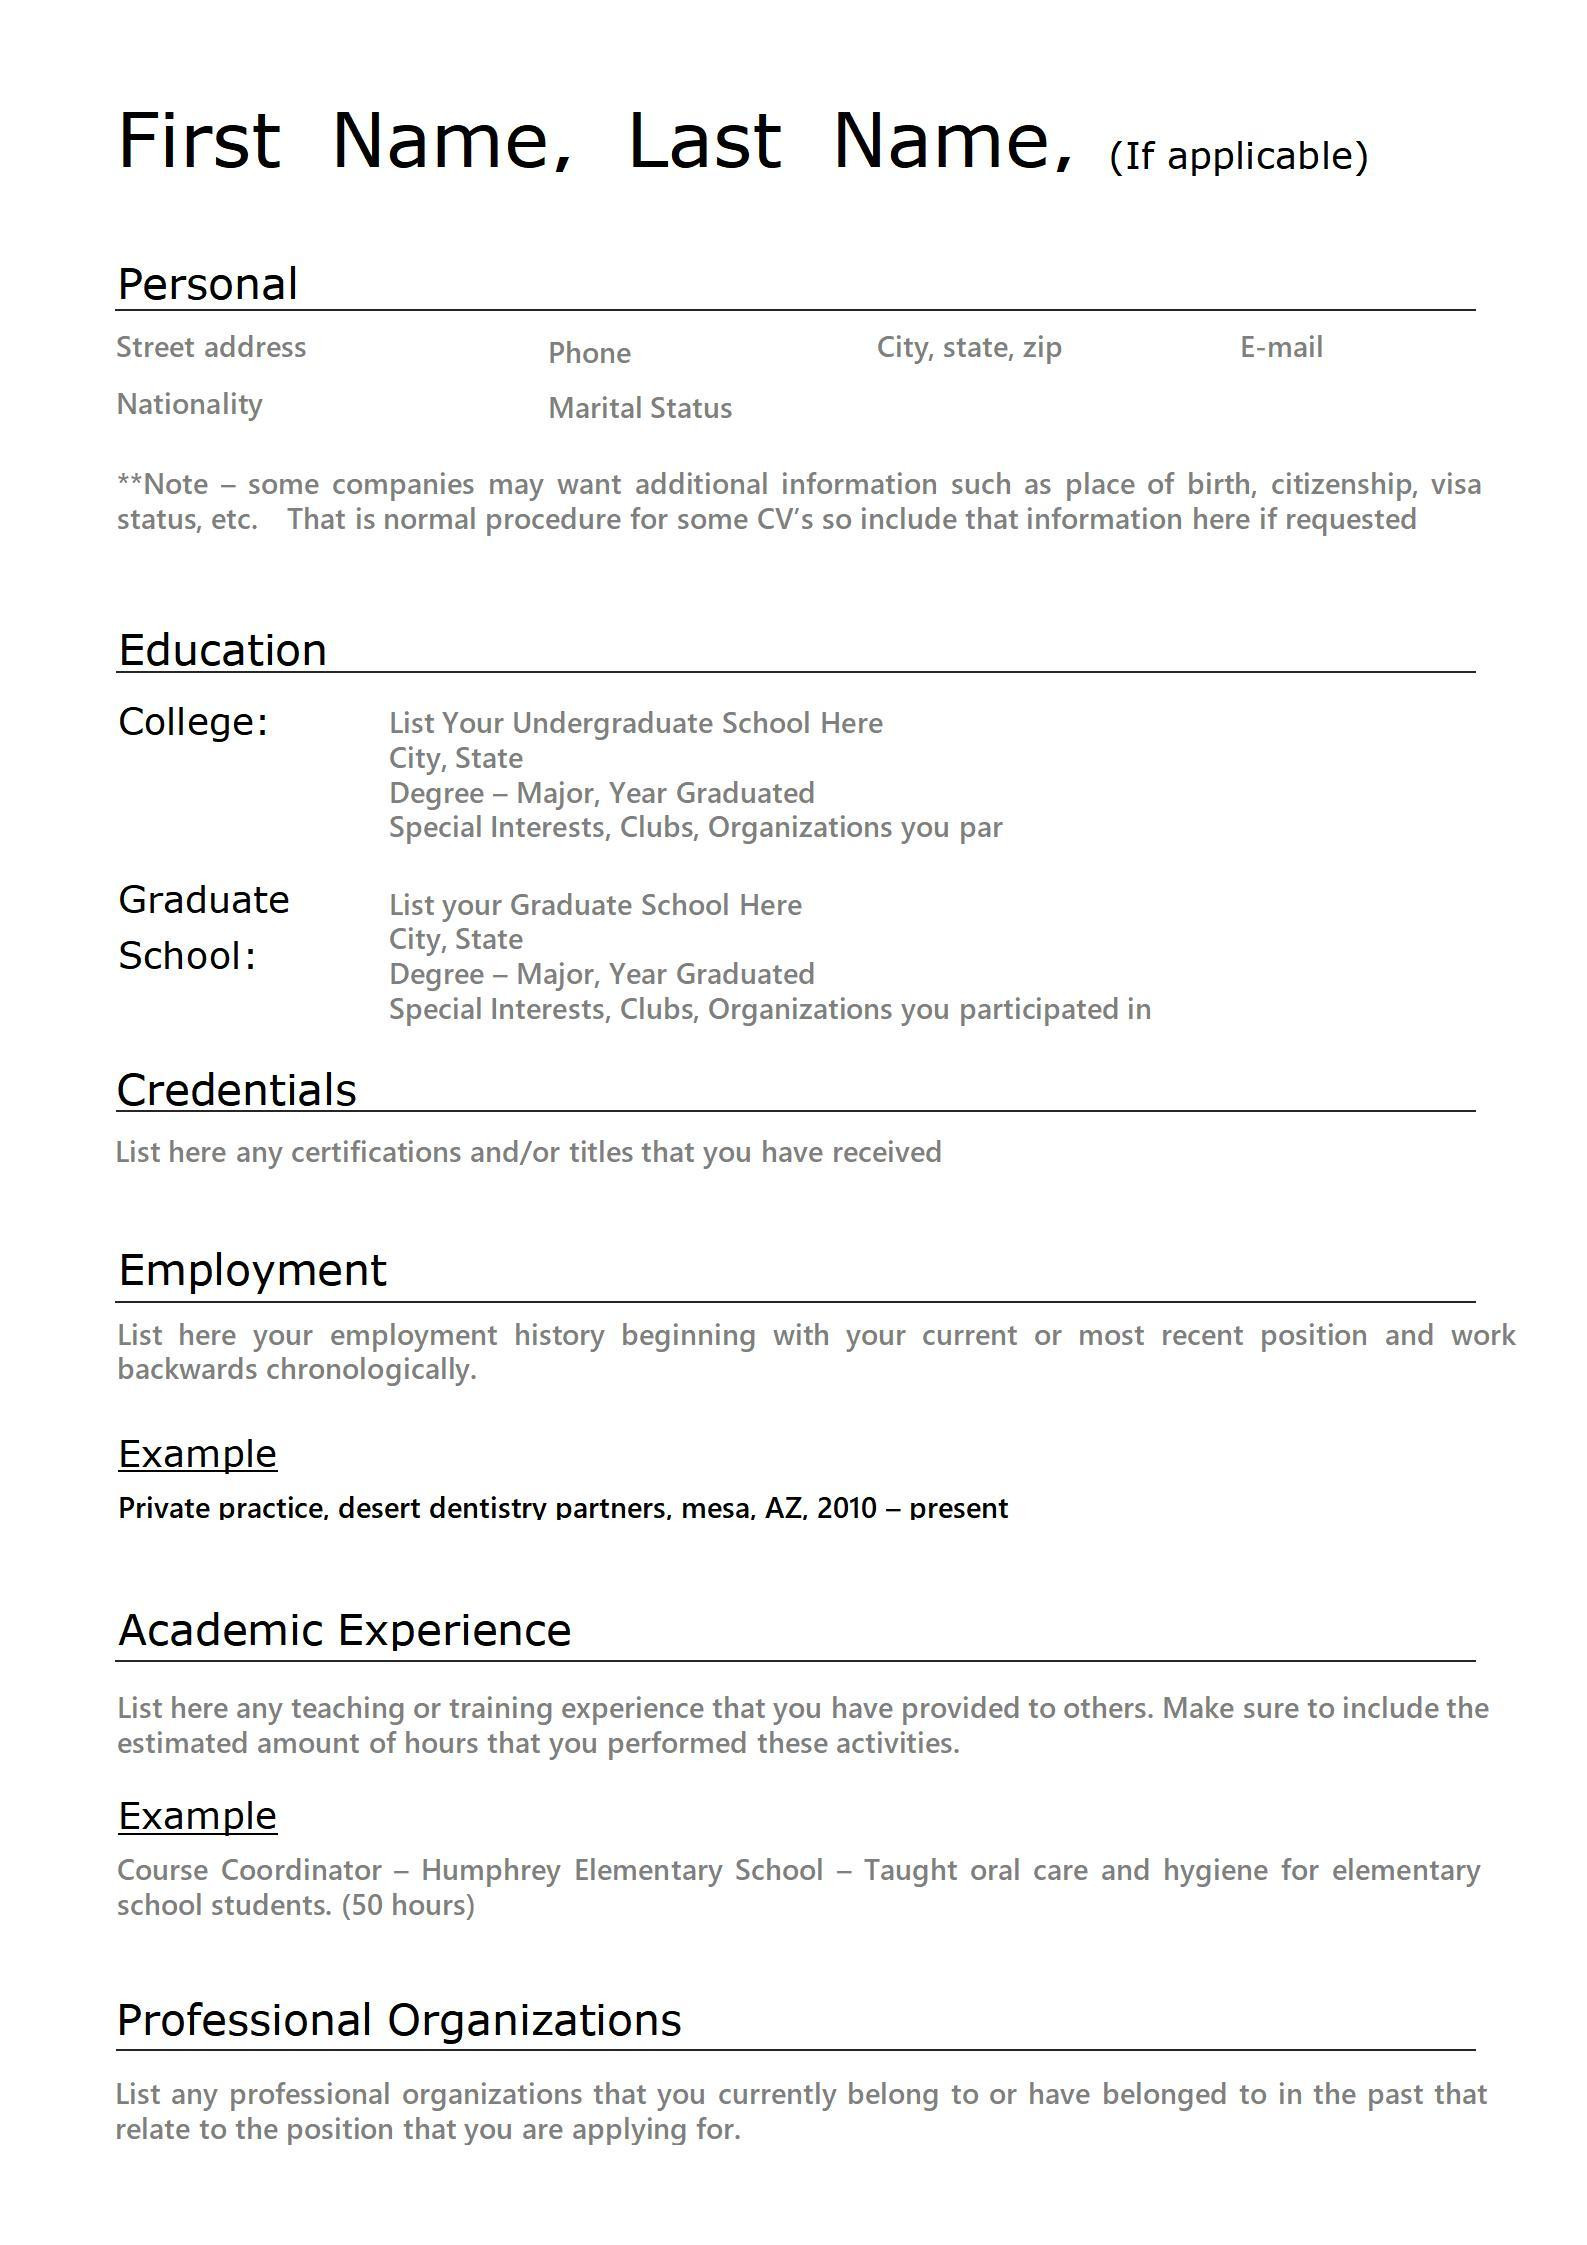 Sample Resume for High School Graduate without Work Experience First-time Resume with No Experience Samples Wps Office Academy